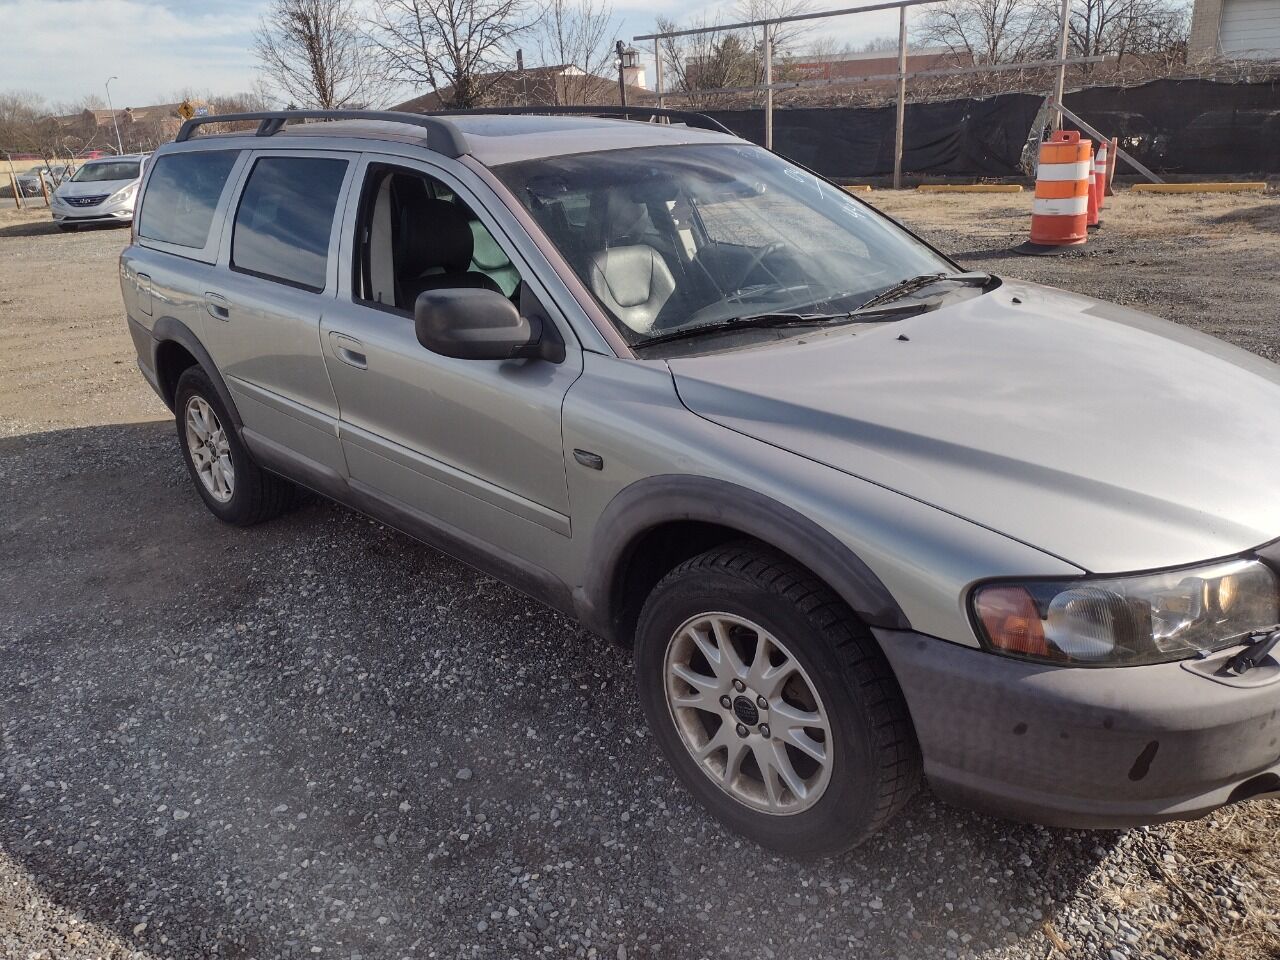 2004 Volvo XC70 For Sale - Carsforsale.com®